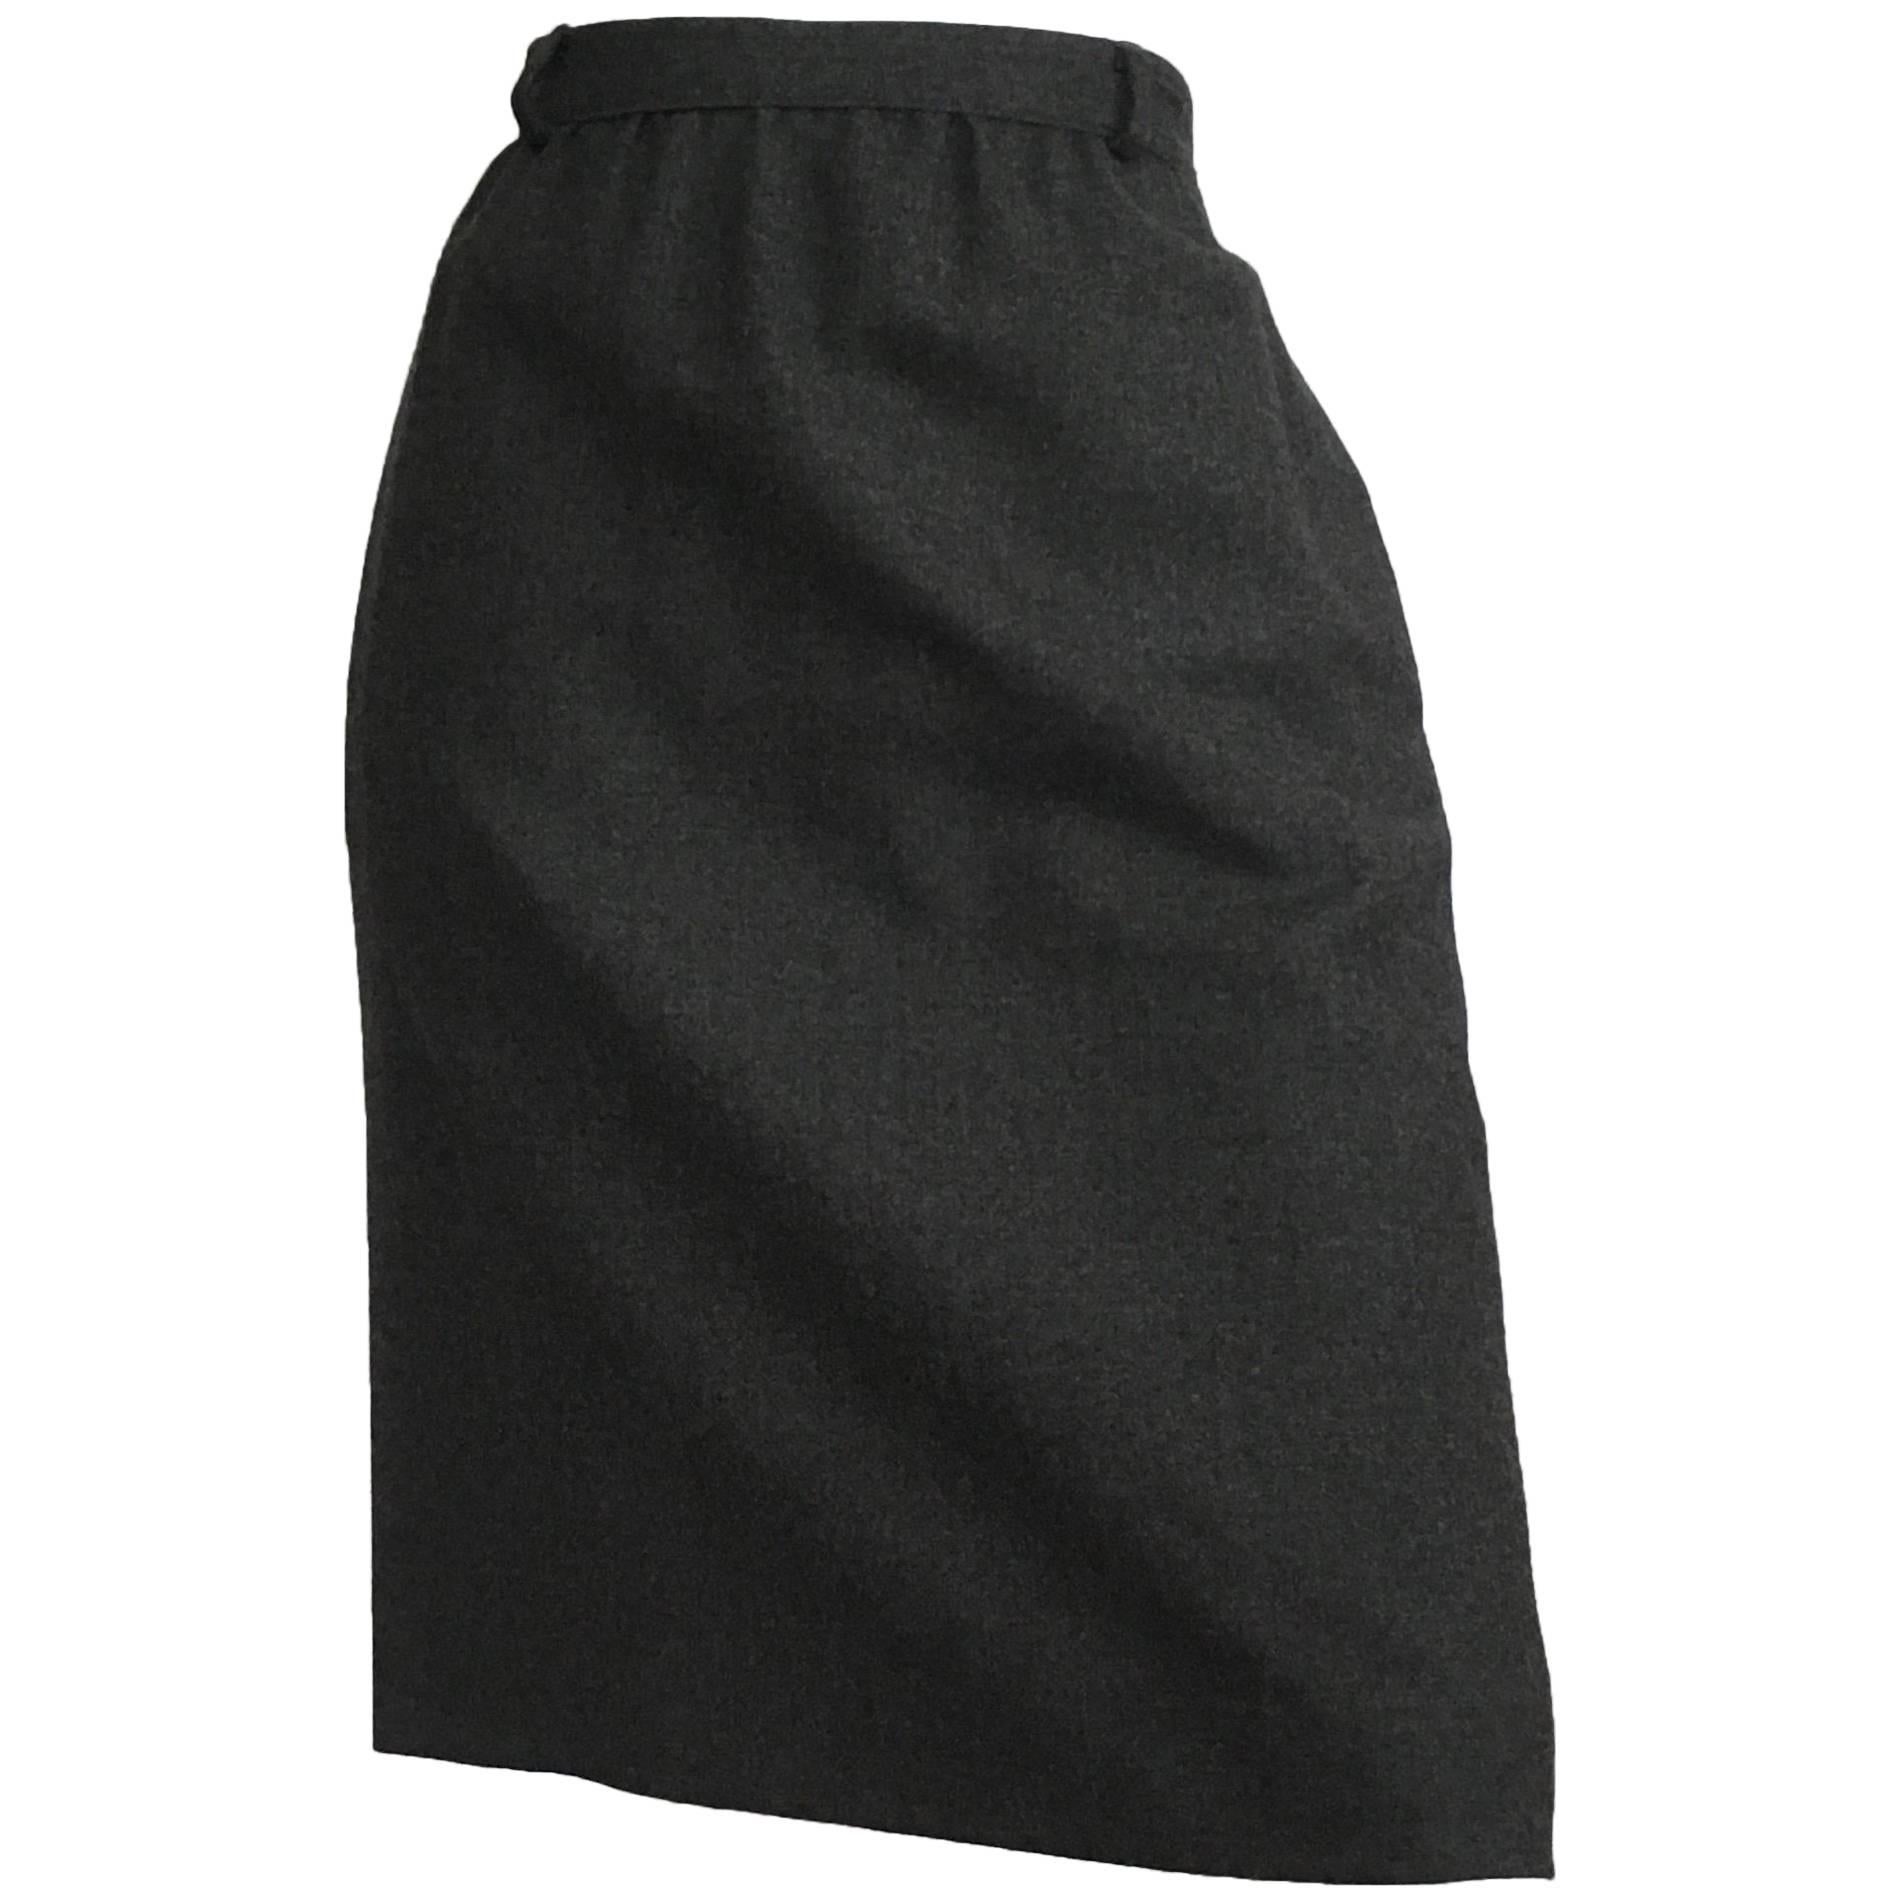 Valentino Grey Wool Pencil Skirt with Pockets Size 10 / 46. For Sale